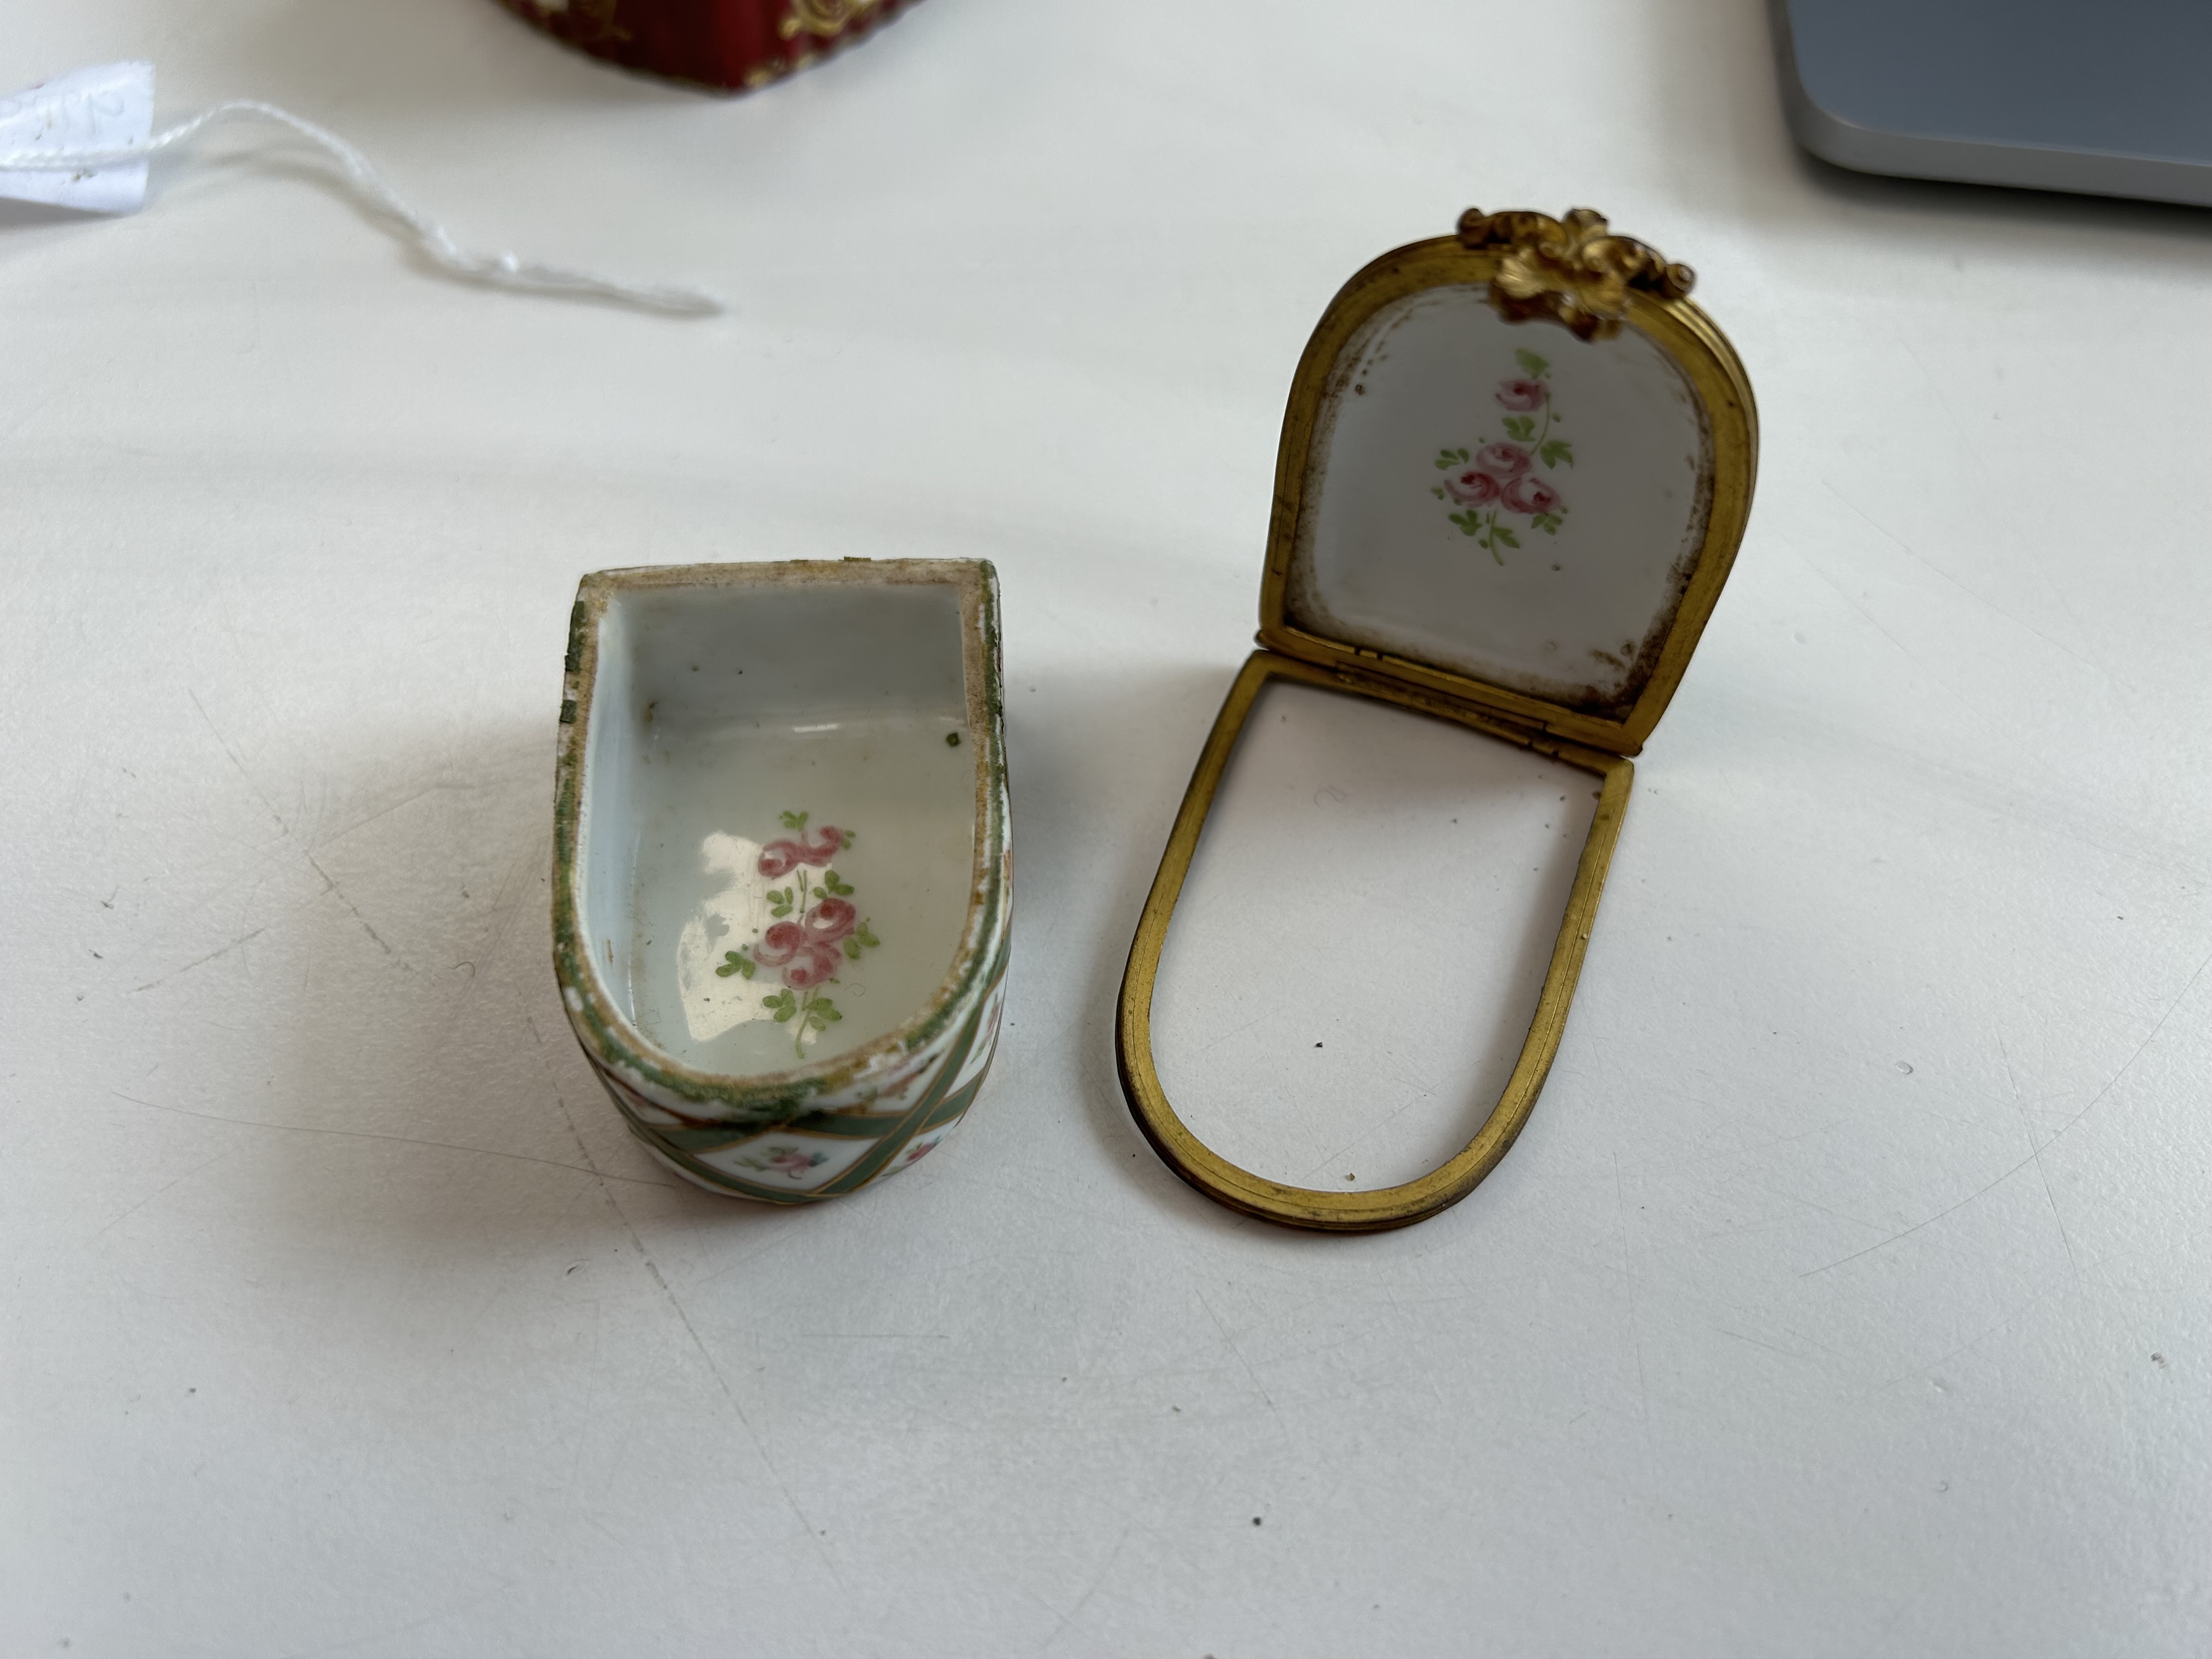 Two late 19th century Sevres style porcelain trinket boxes - Image 5 of 7